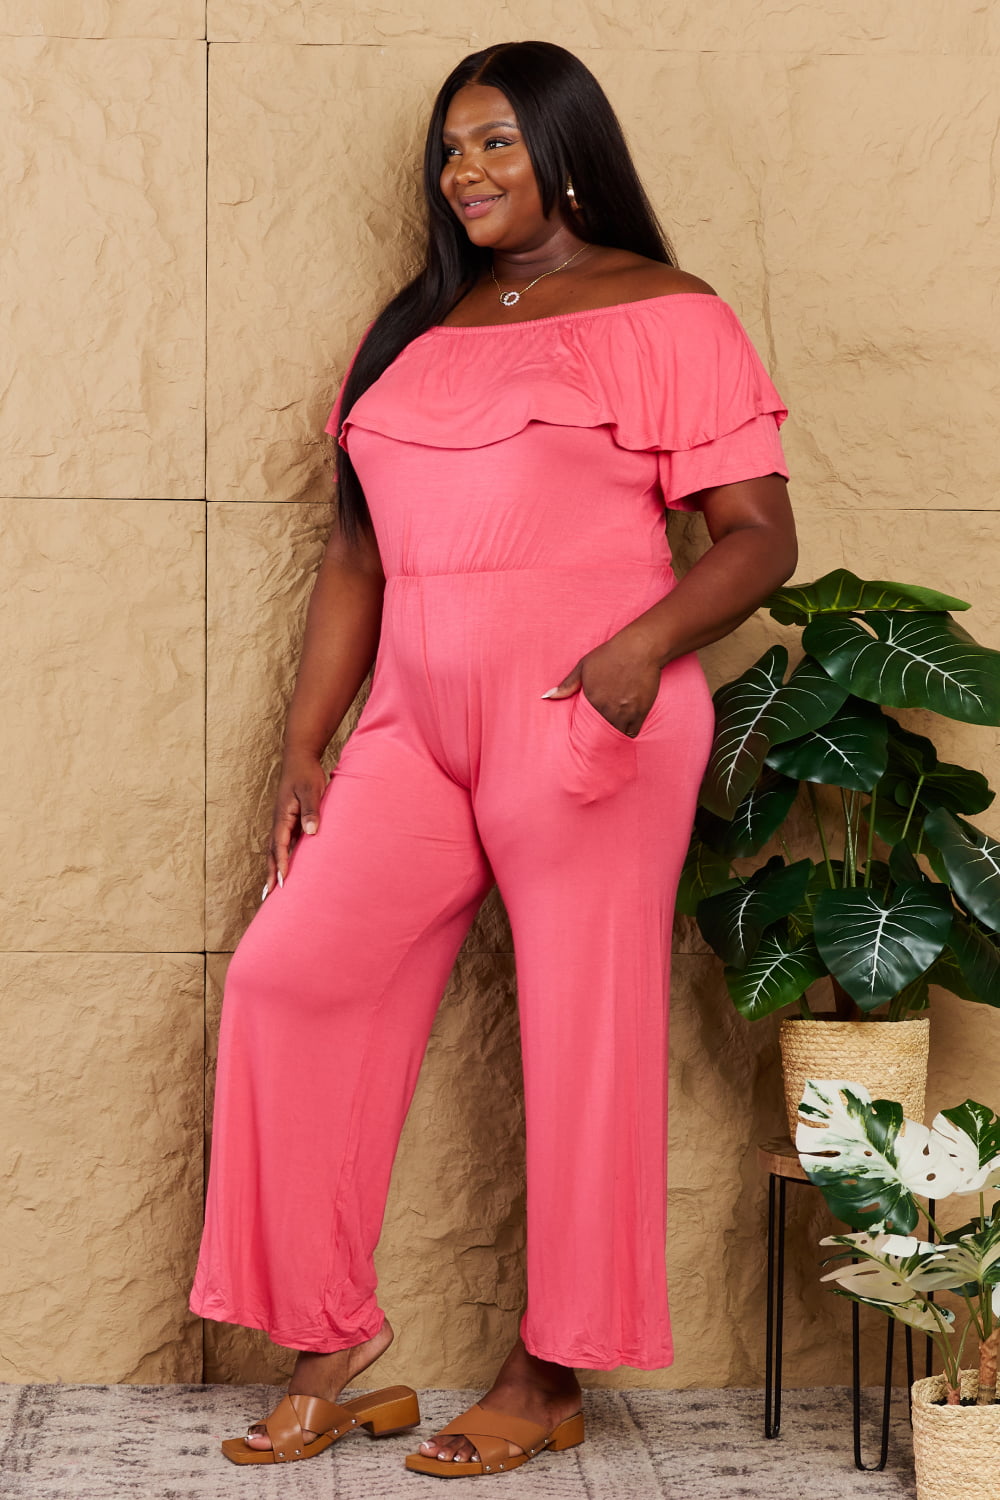 My Favorite Full Size Off-Shoulder Jumpsuit with Pockets - Women’s Clothing & Accessories - Jumpsuits & Rompers - 8